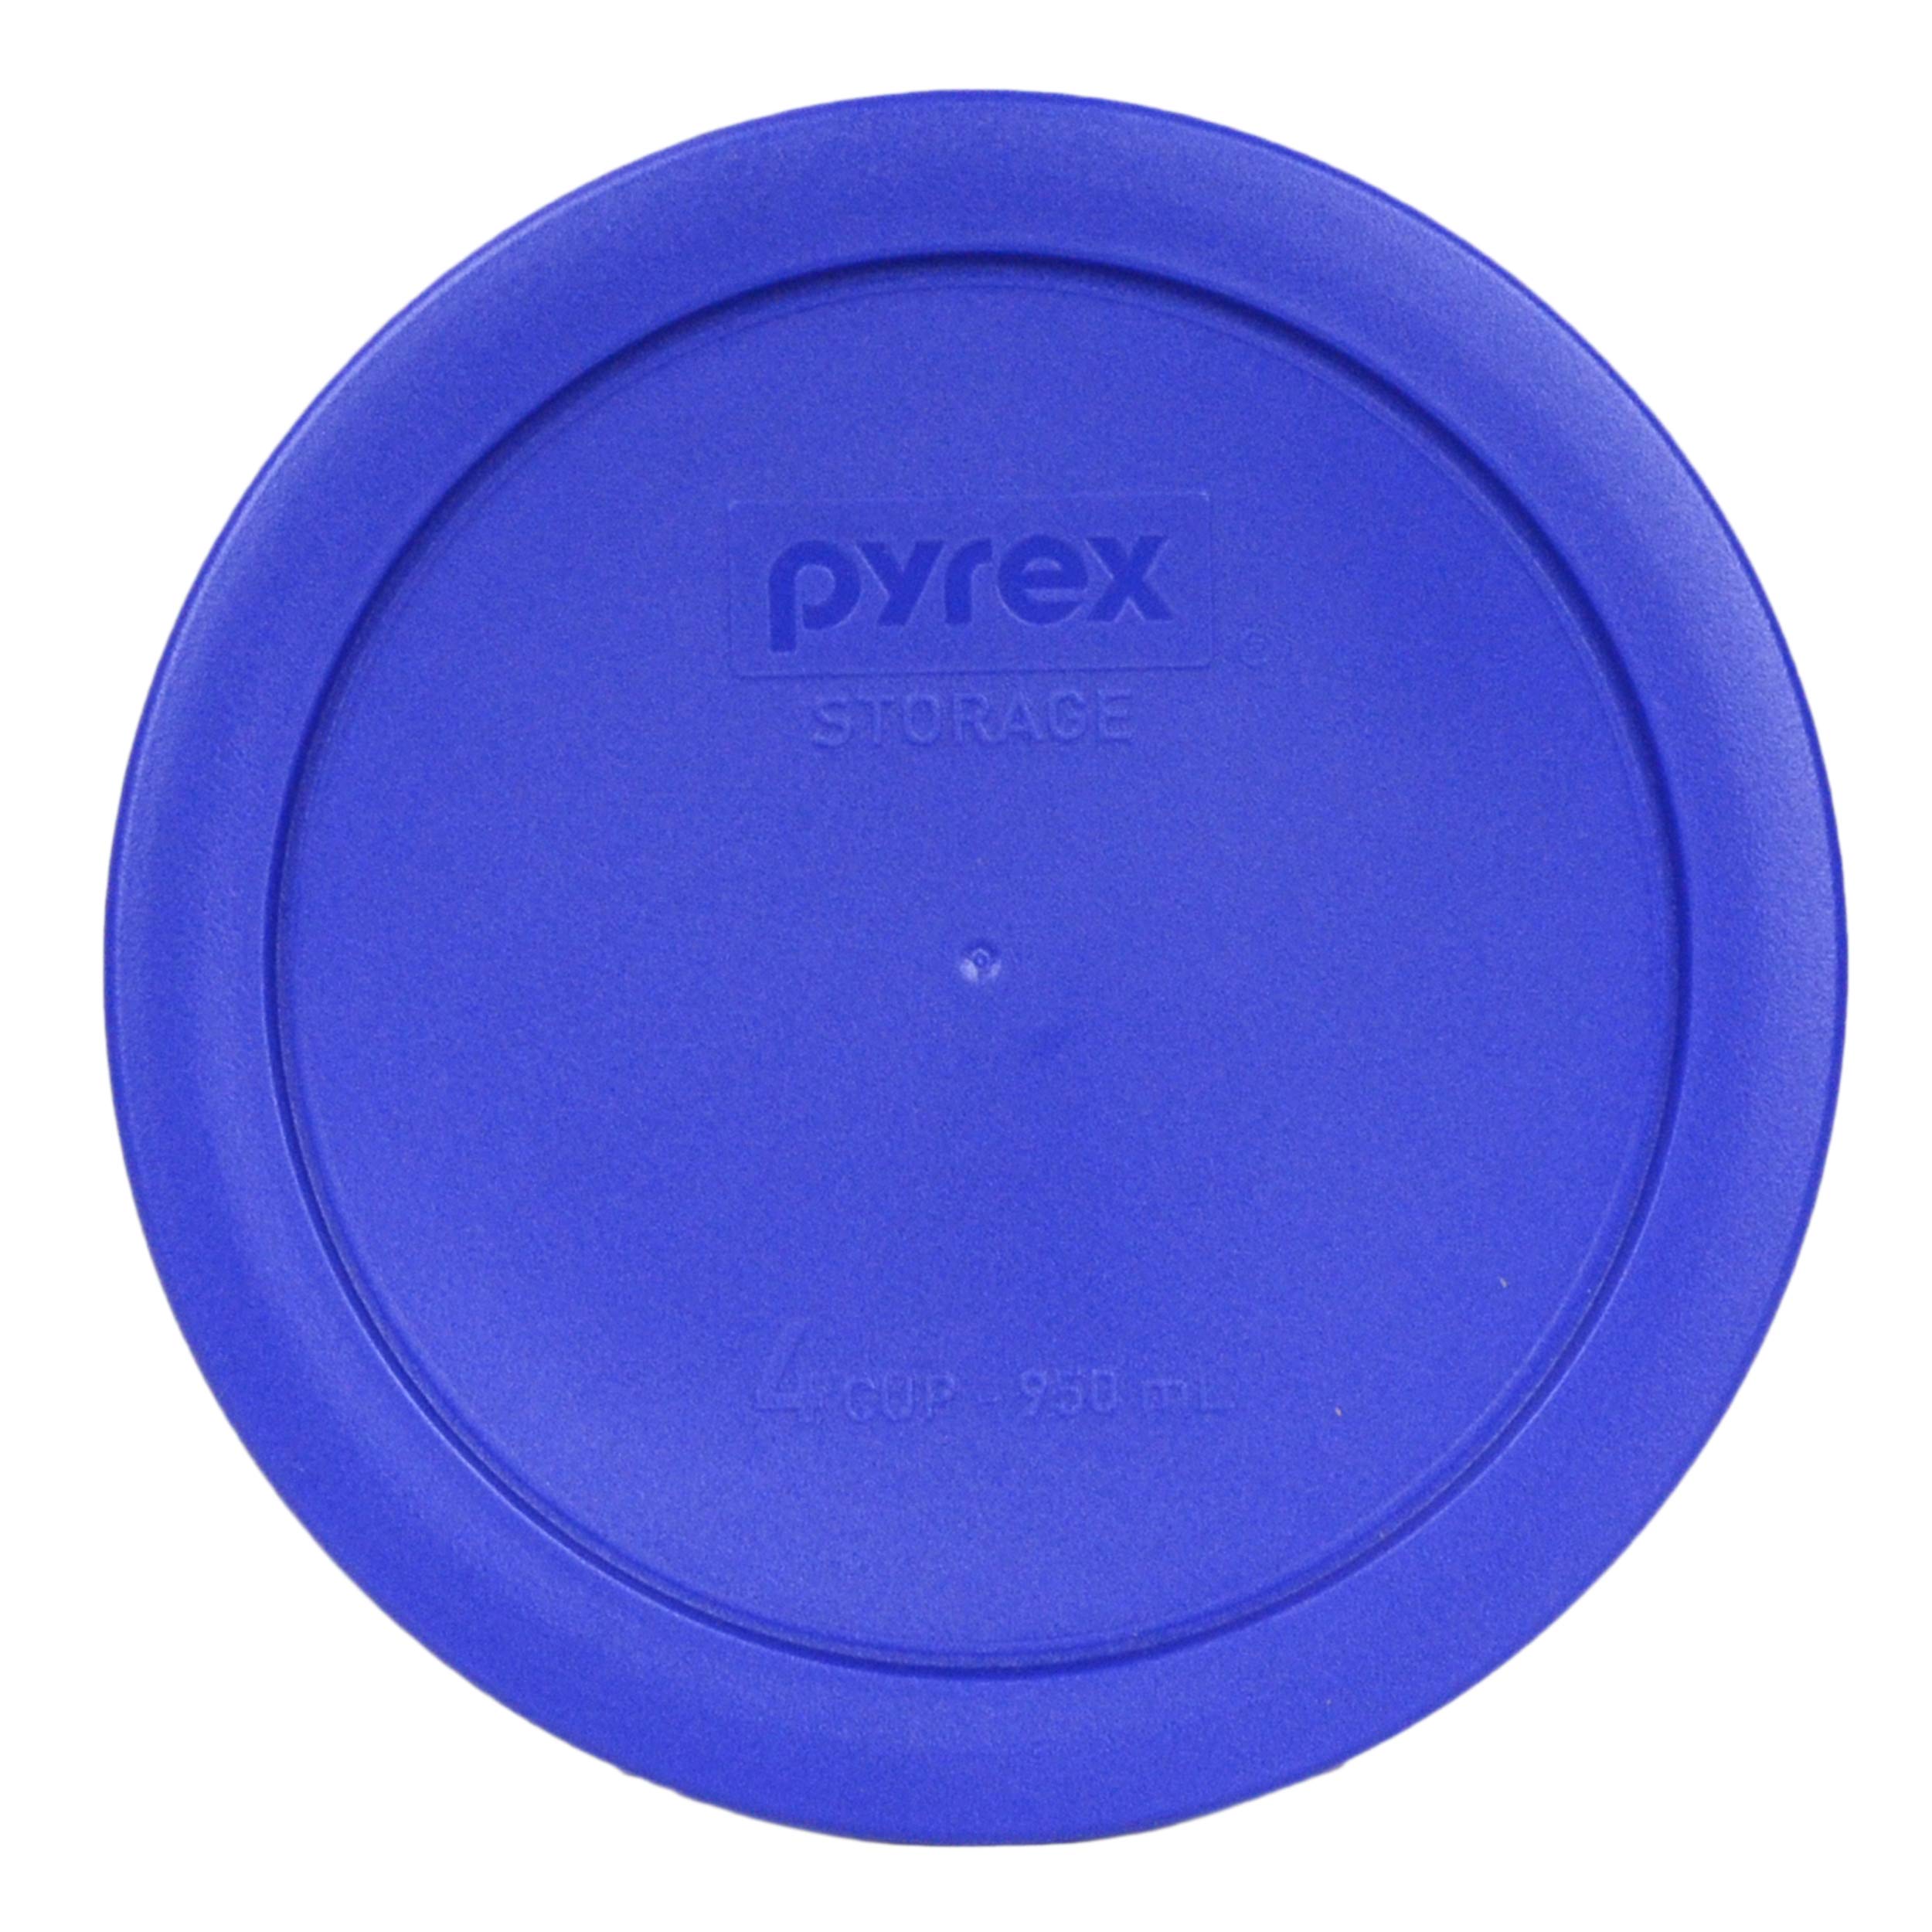 Pyrex Bundle - 5 Items: (2) 7200-PC 2-Cup Orange Lids, (1) 7201-PC 4-Cup Cadet Blue Lid, (1) 7210-PC 3-Cup Light Green Lid, (1) 7211-PC 6-Cup Red Lid Made in the USA